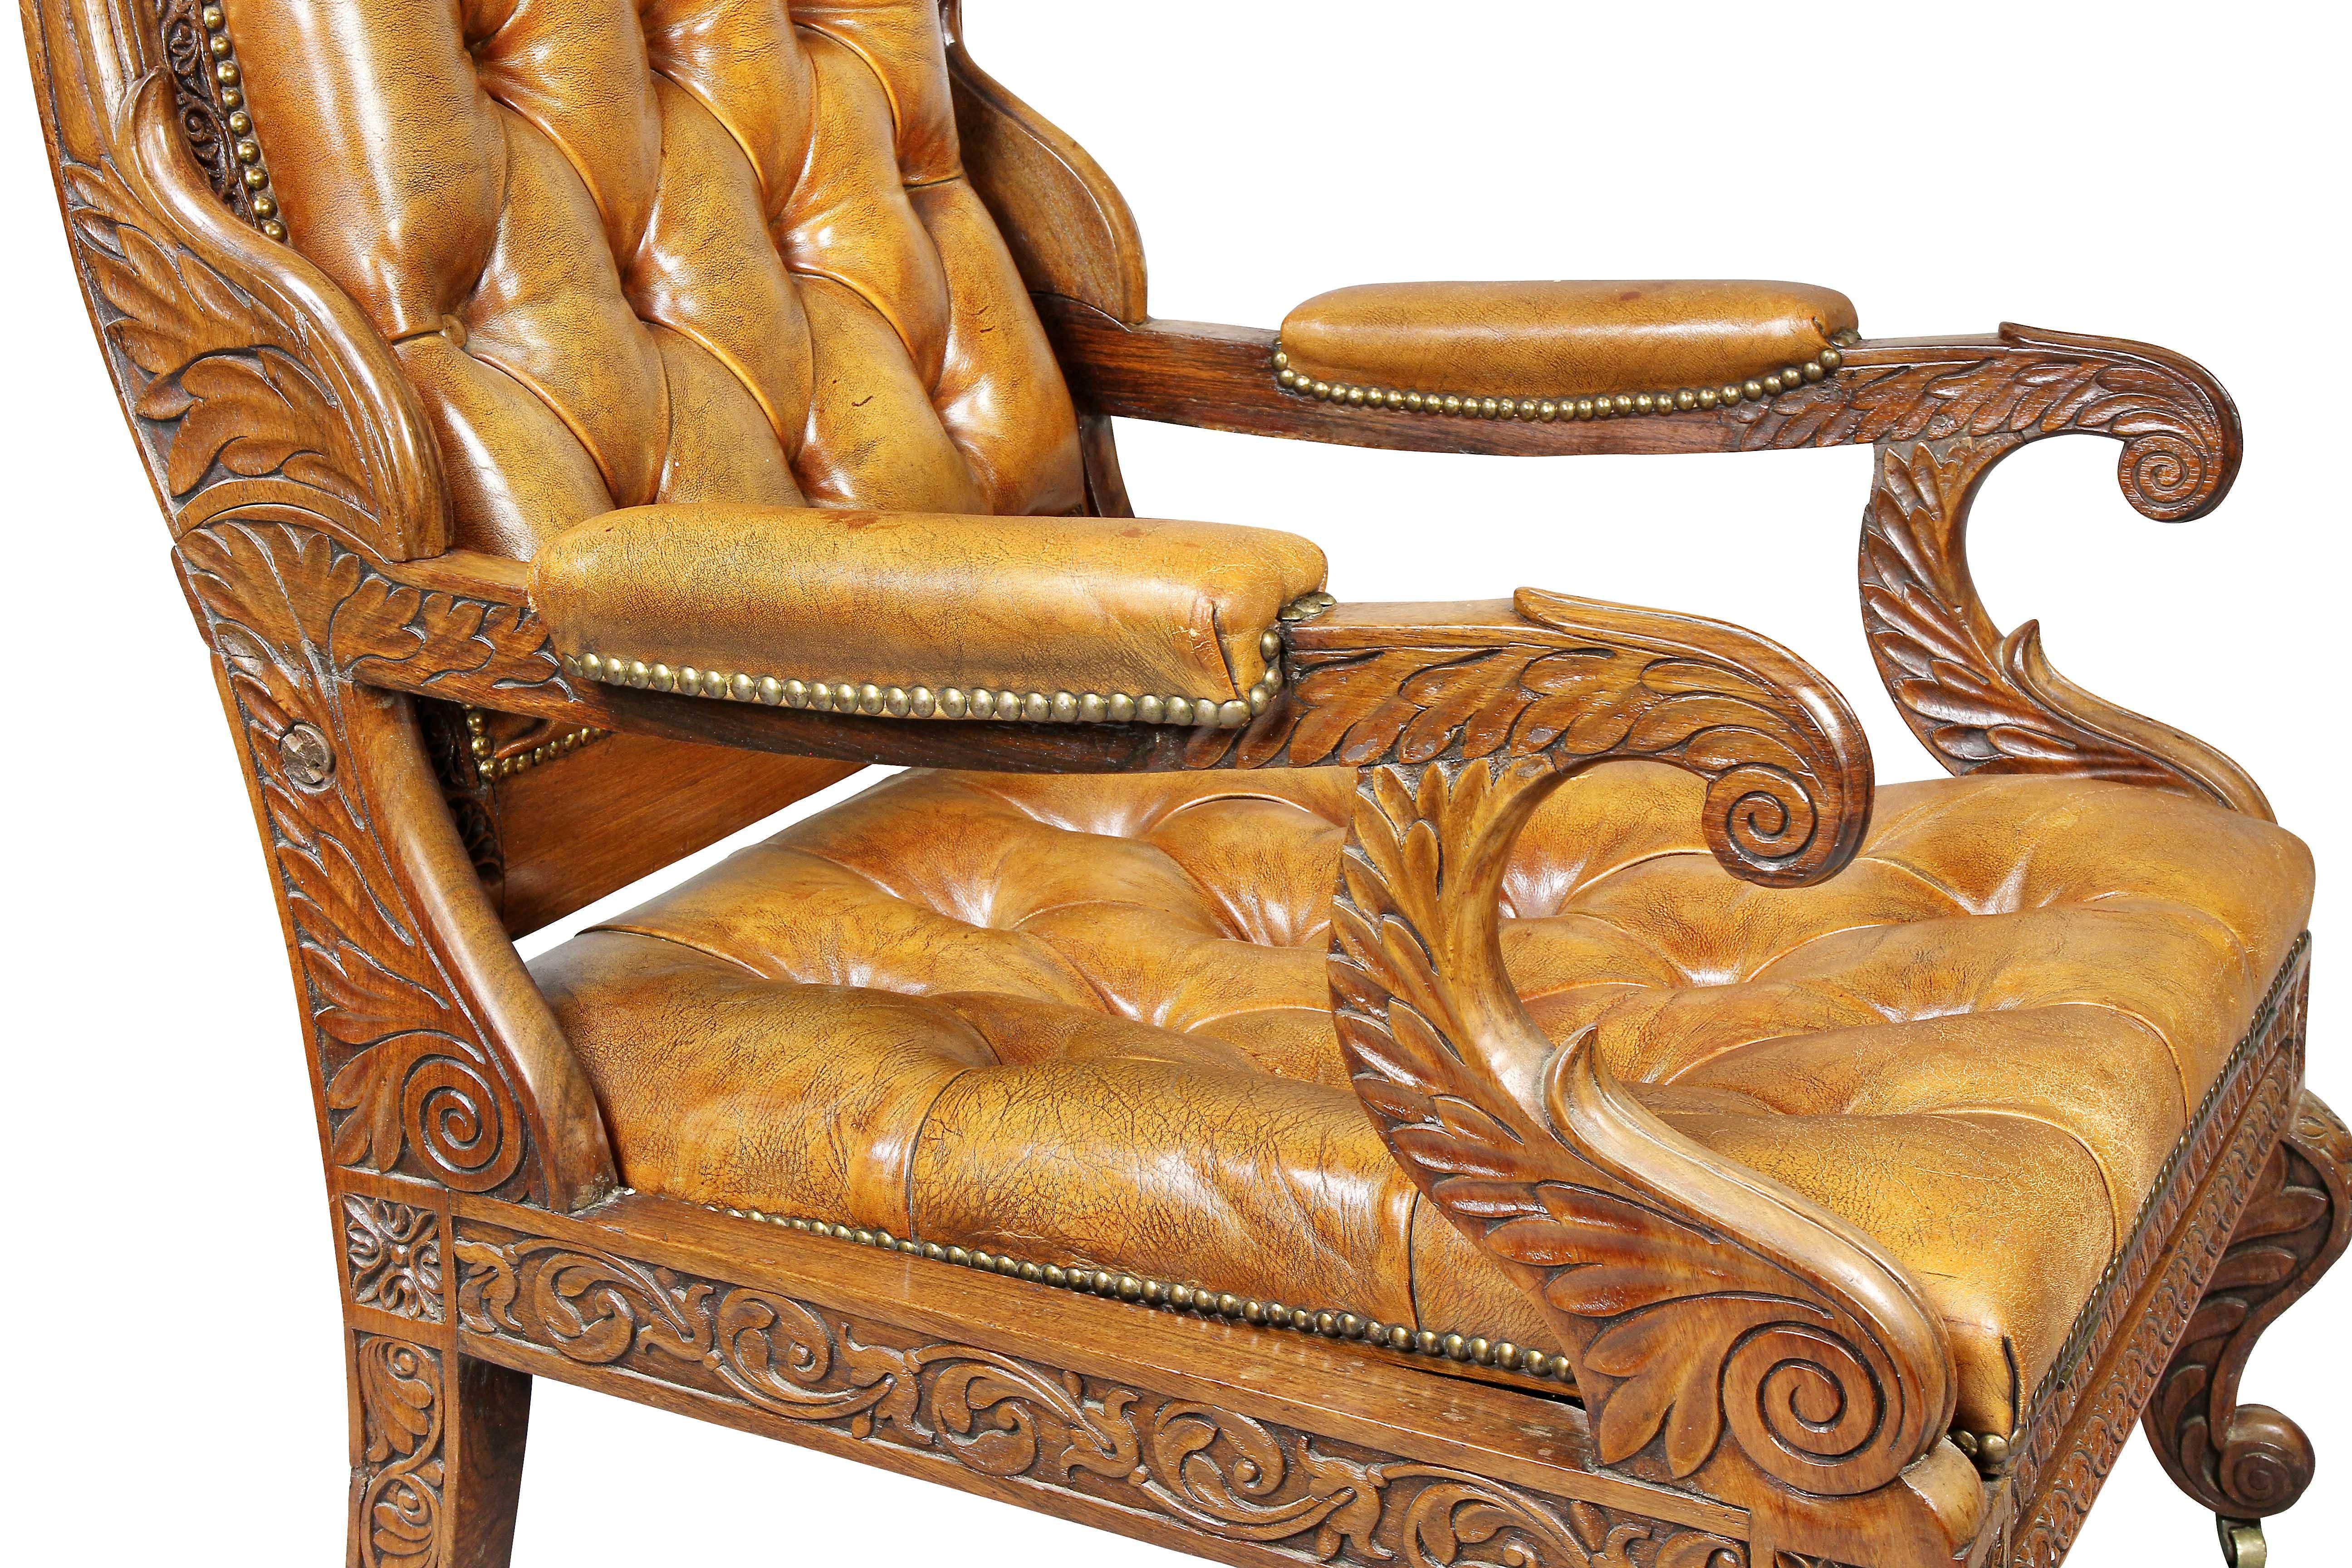 Early 19th Century Regency Anglo Indian Rosewood Reclining Armchair